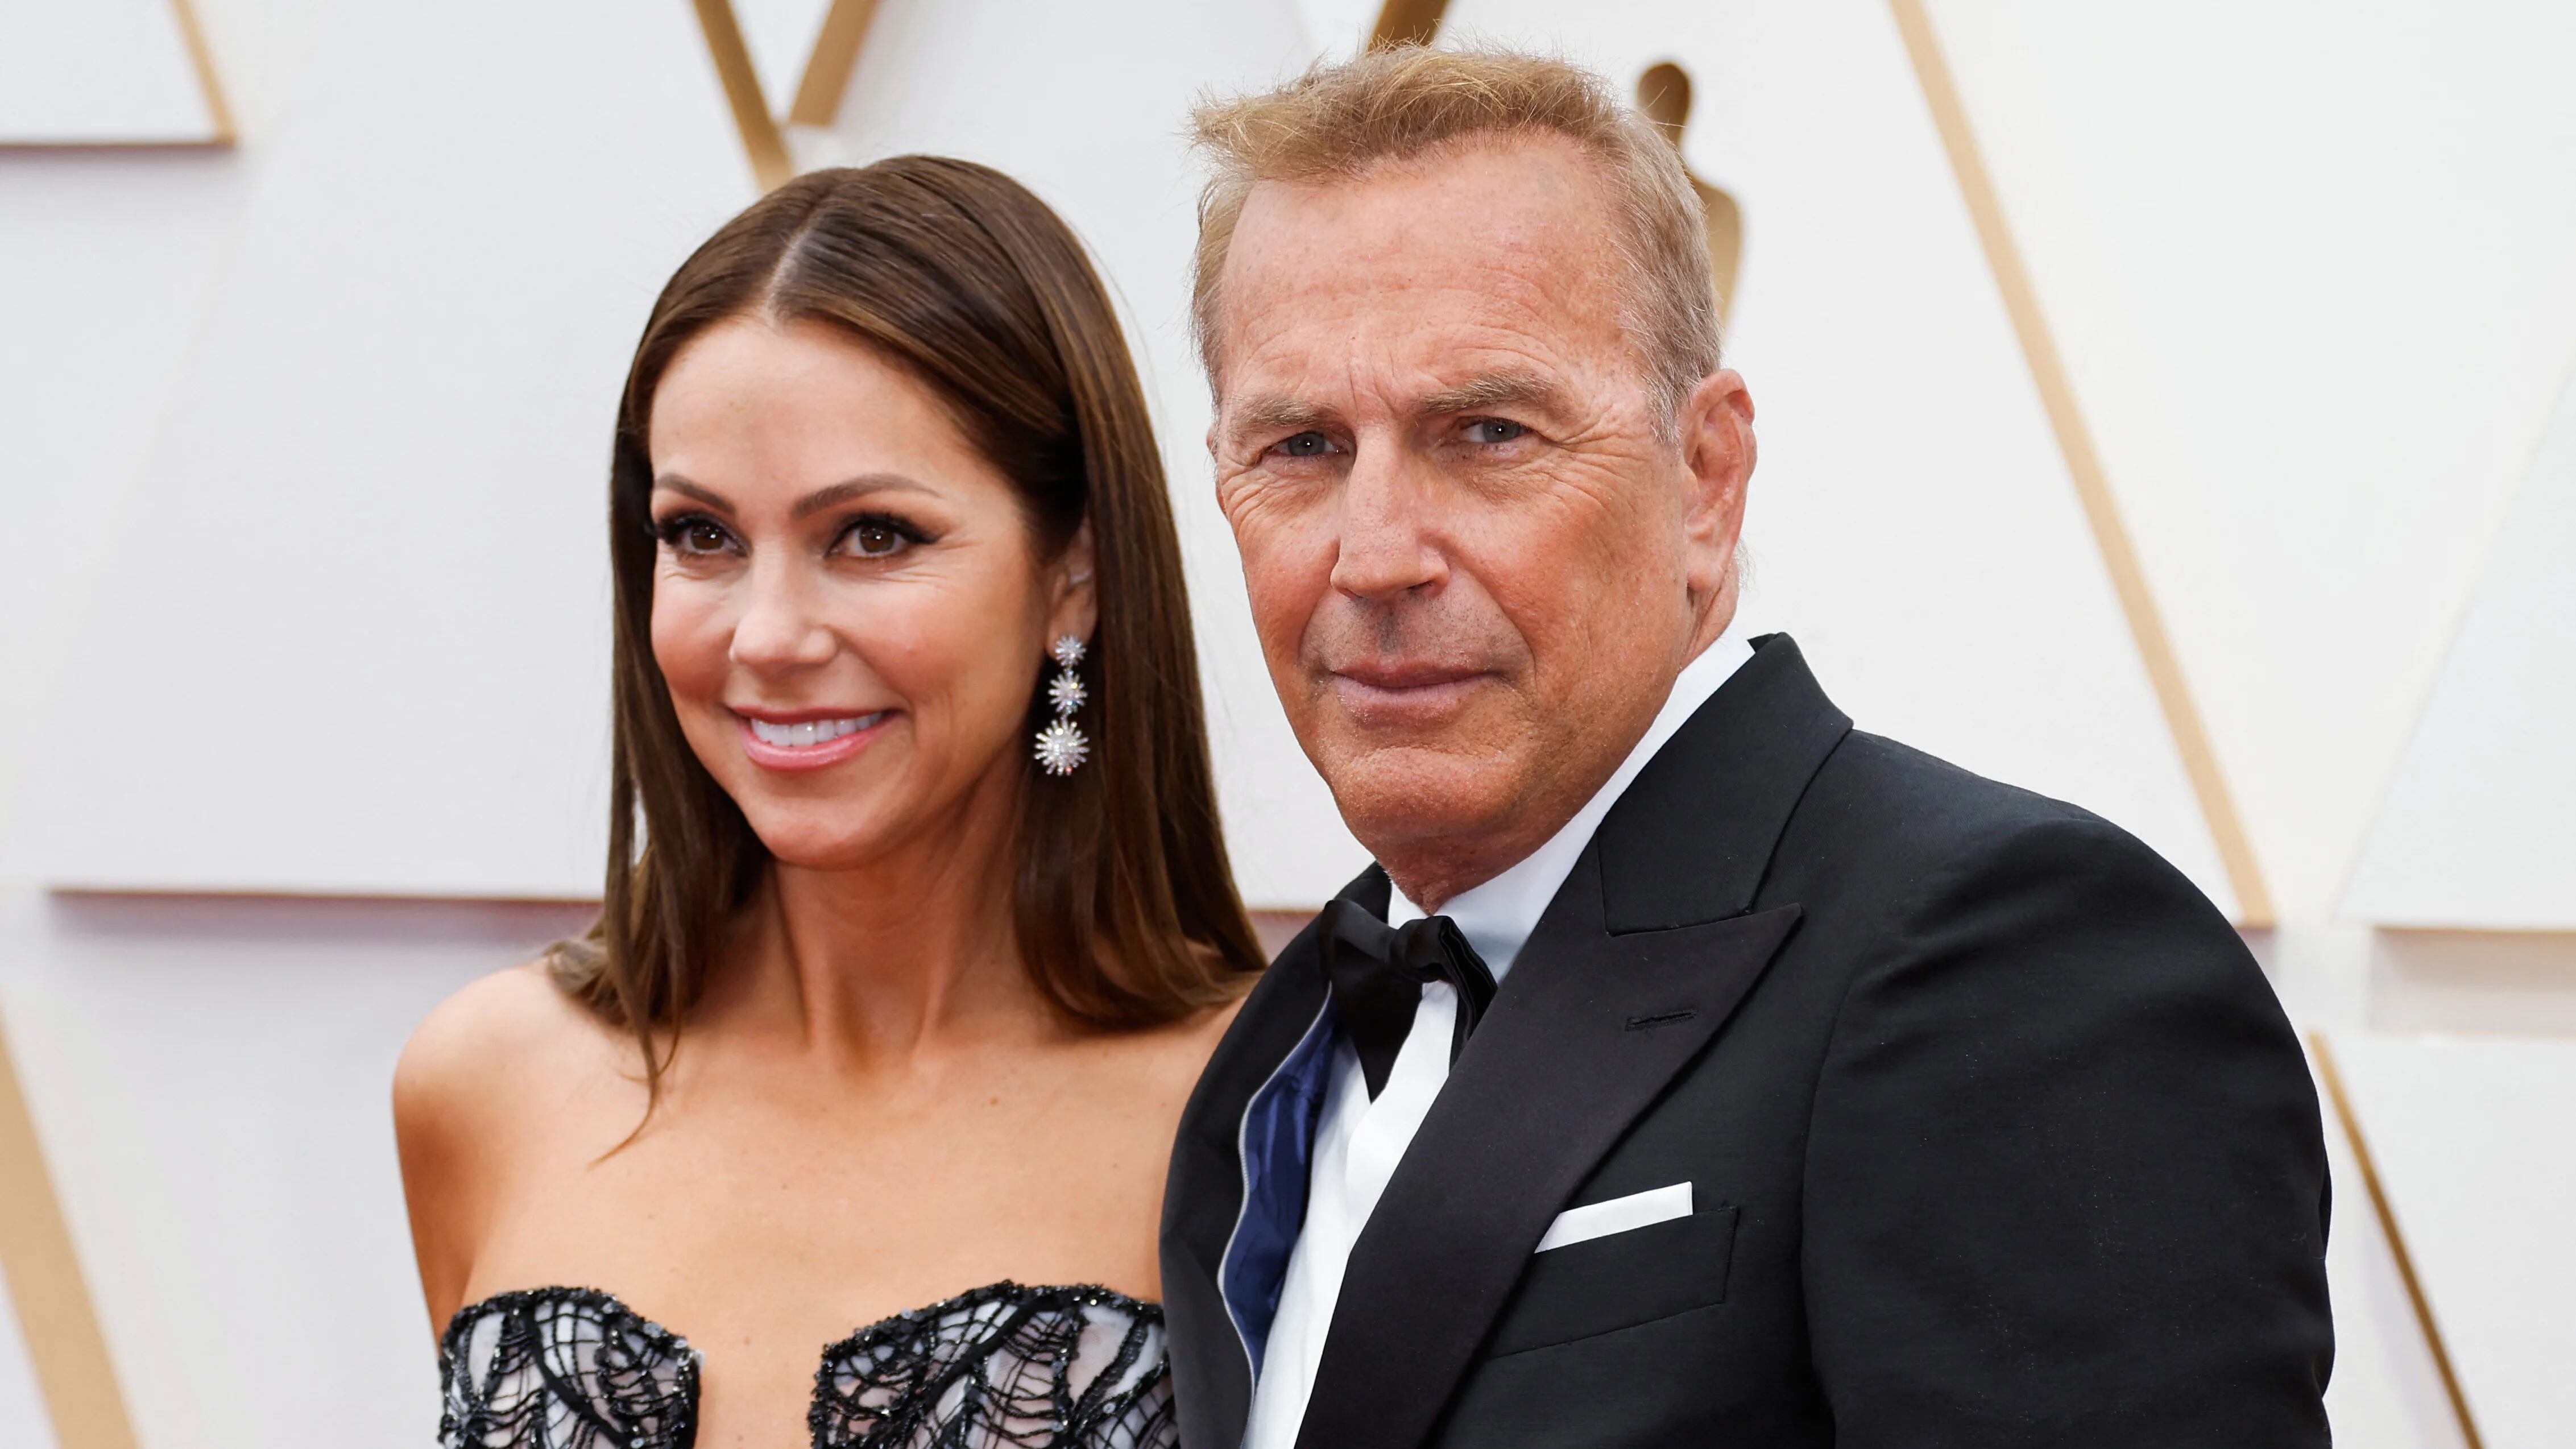 Kevin Costner and wife Christine Baumgartner pose on the red carpet during the Oscars arrivals at the 94th Academy Awards in Hollywood, Los Angeles, California, U.S., March 27, 2022. REUTERS/Eric Gaillard